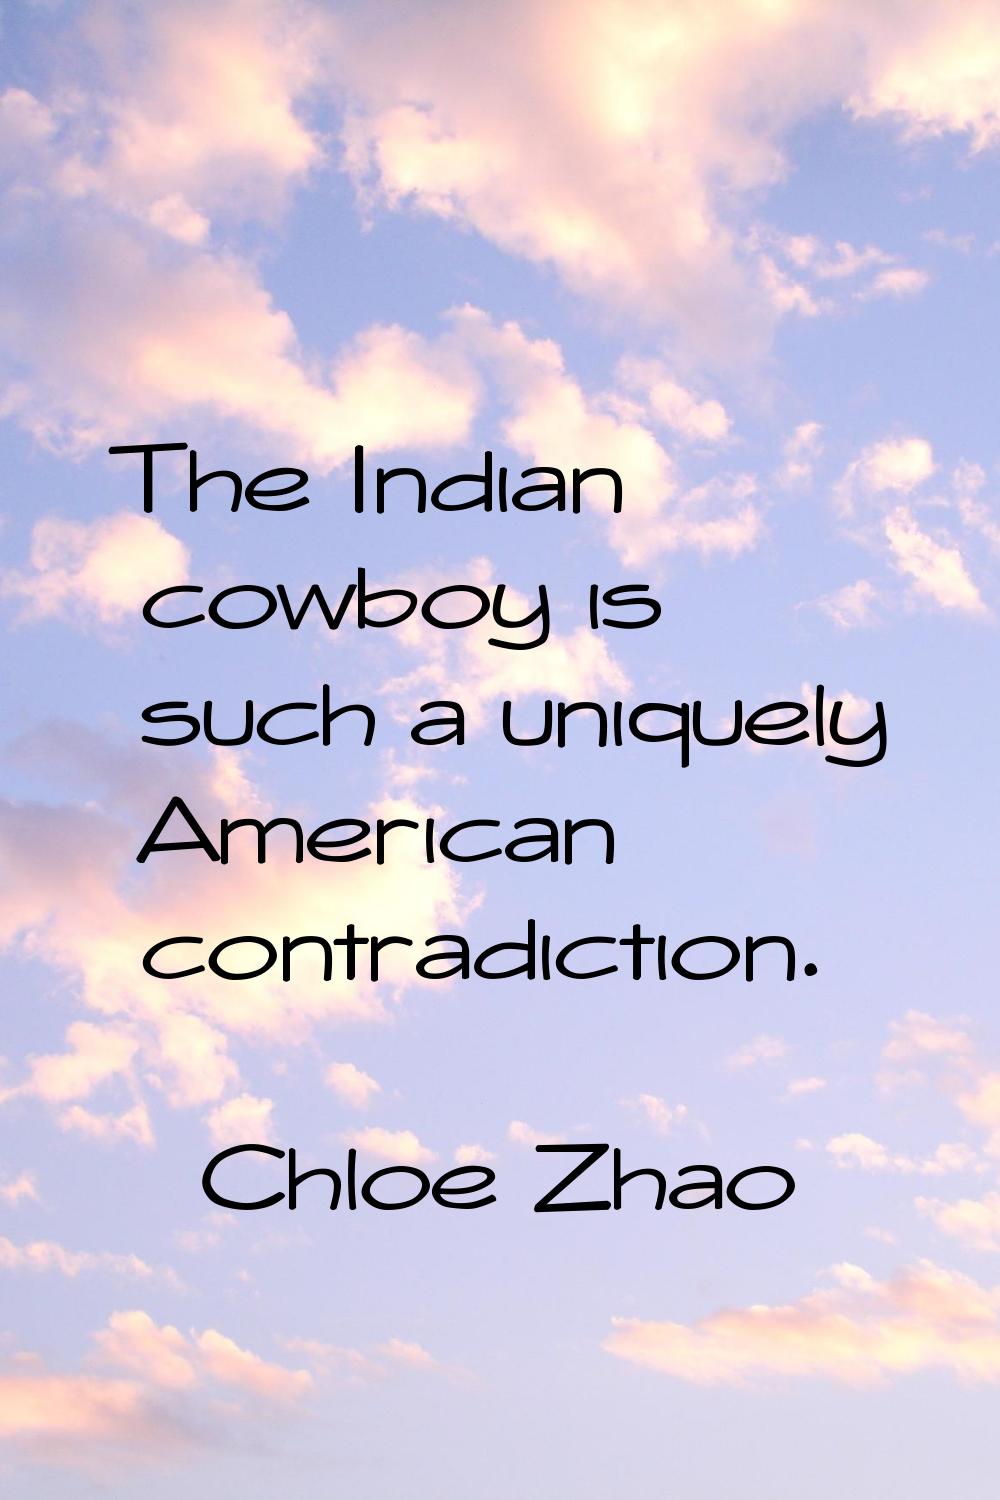 The Indian cowboy is such a uniquely American contradiction.